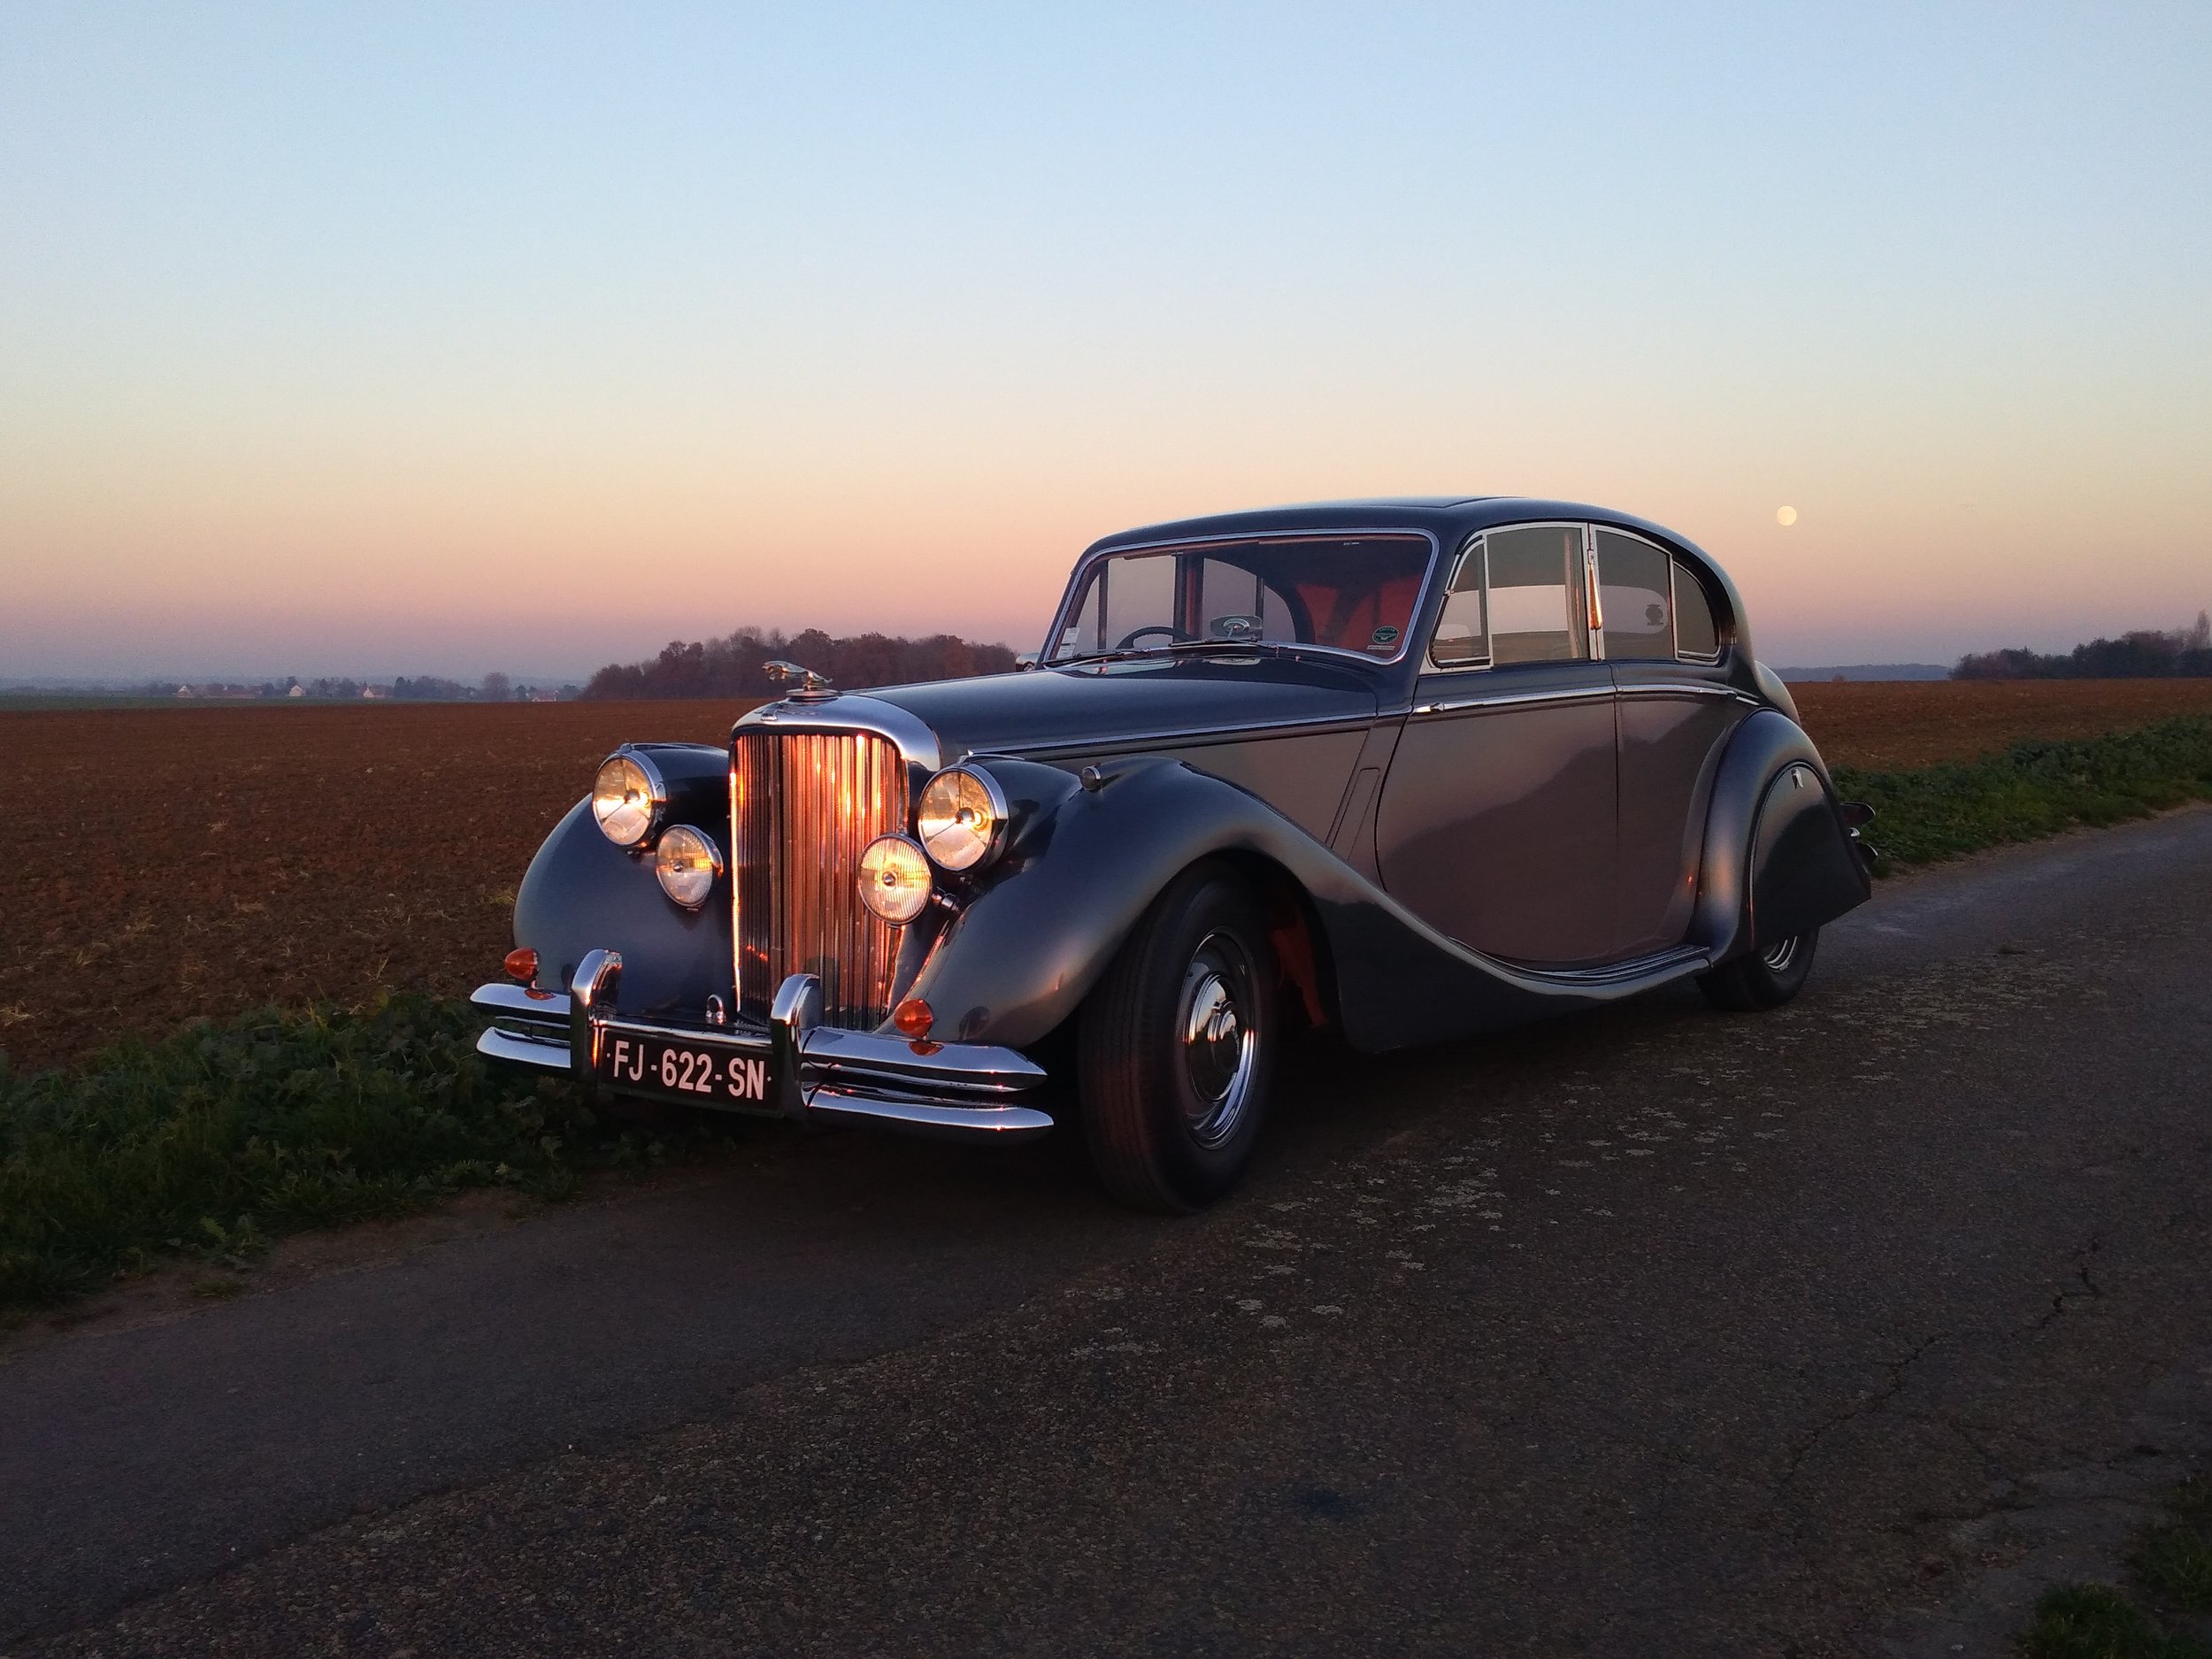 A classic car is parked on a country road at sunset near Chateau de Courtomer.